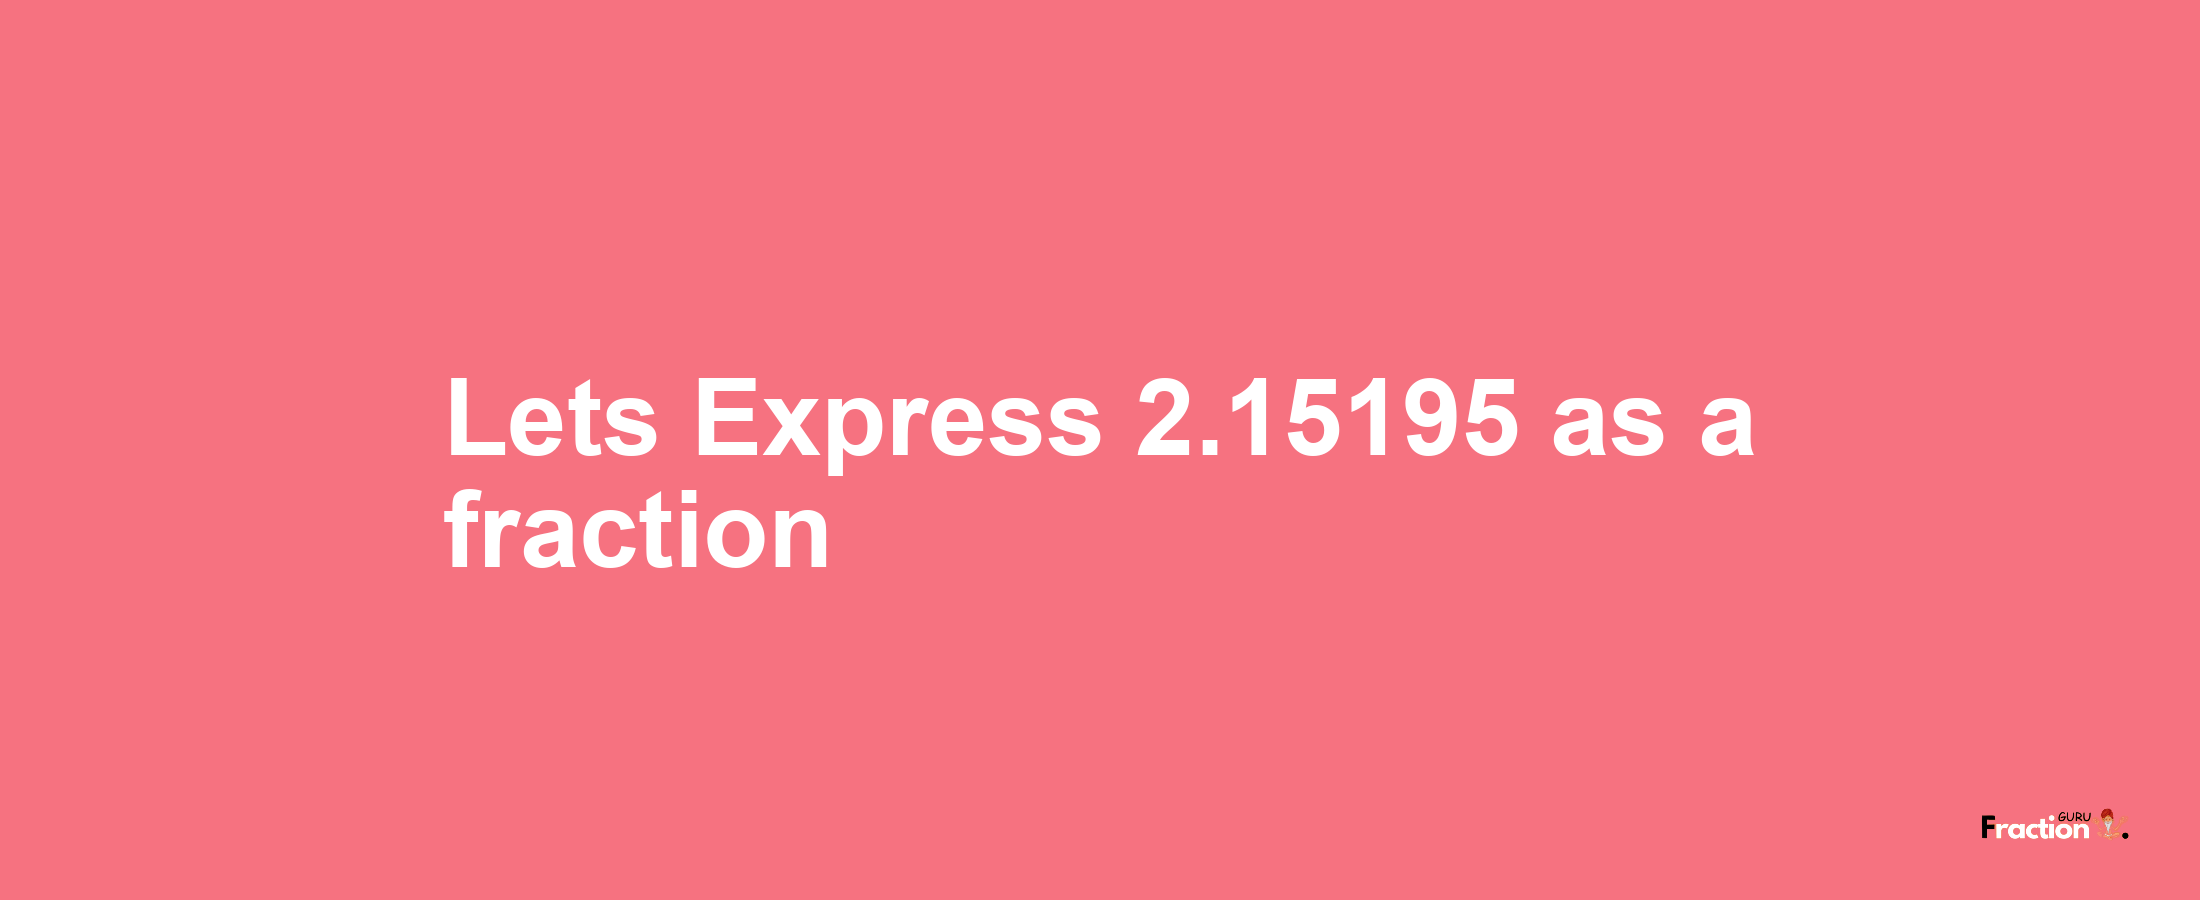 Lets Express 2.15195 as afraction